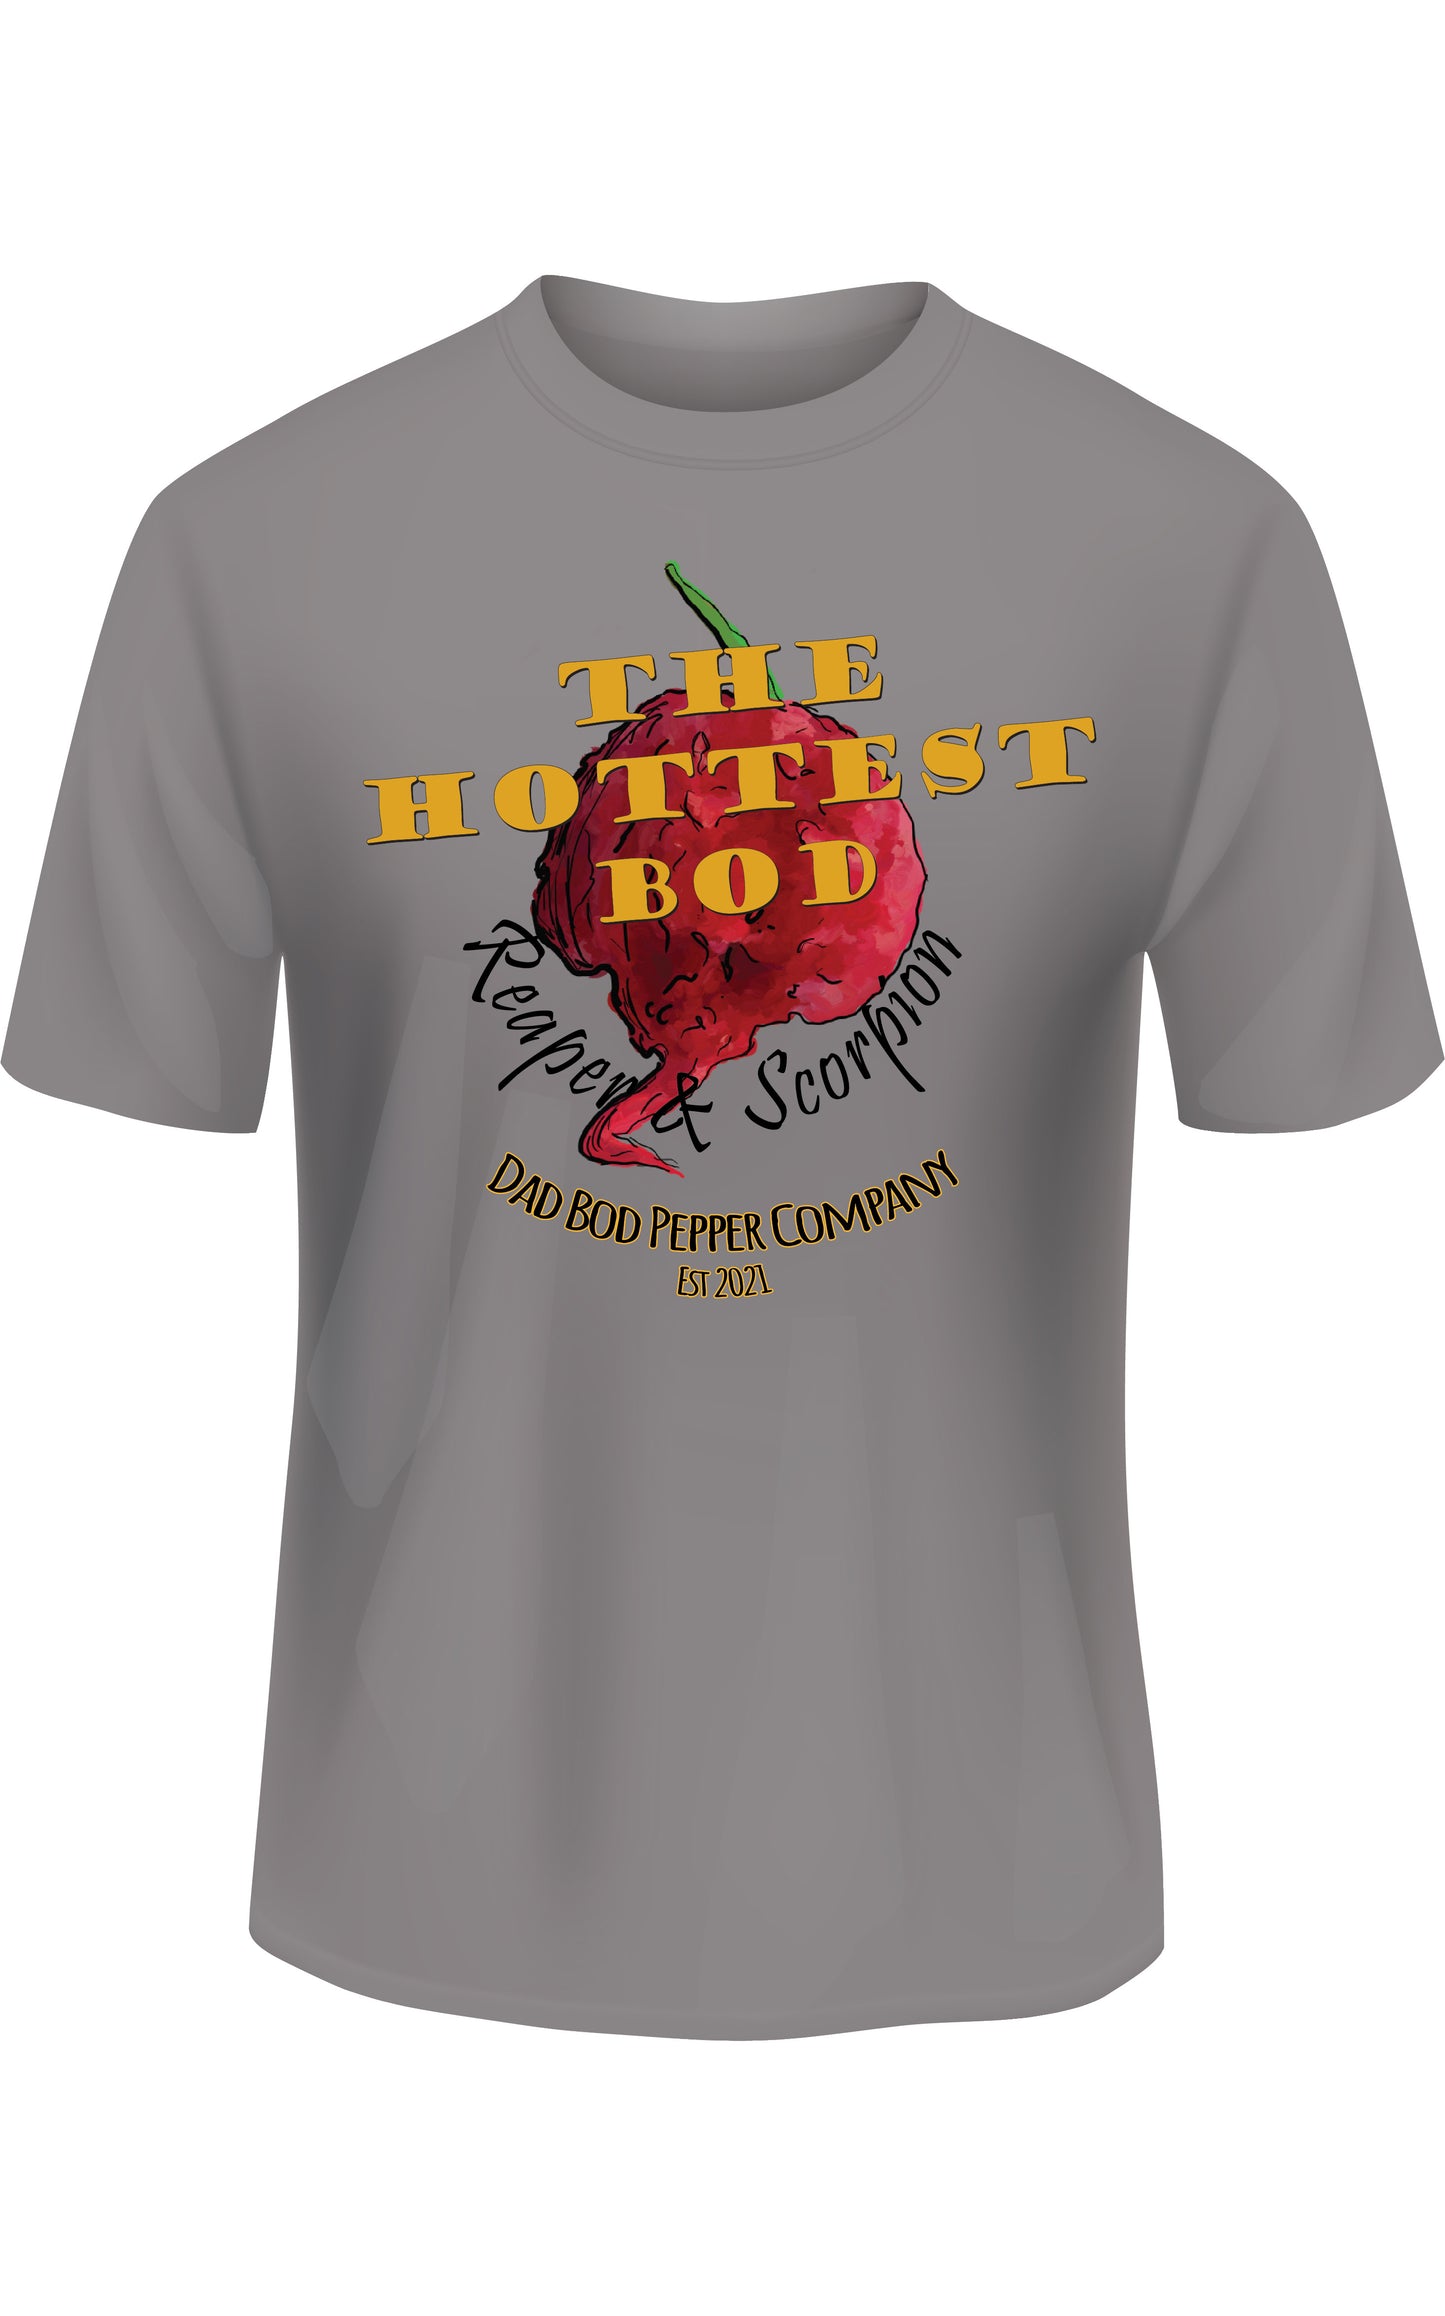 The Hottest Bod Tshirt - Gray